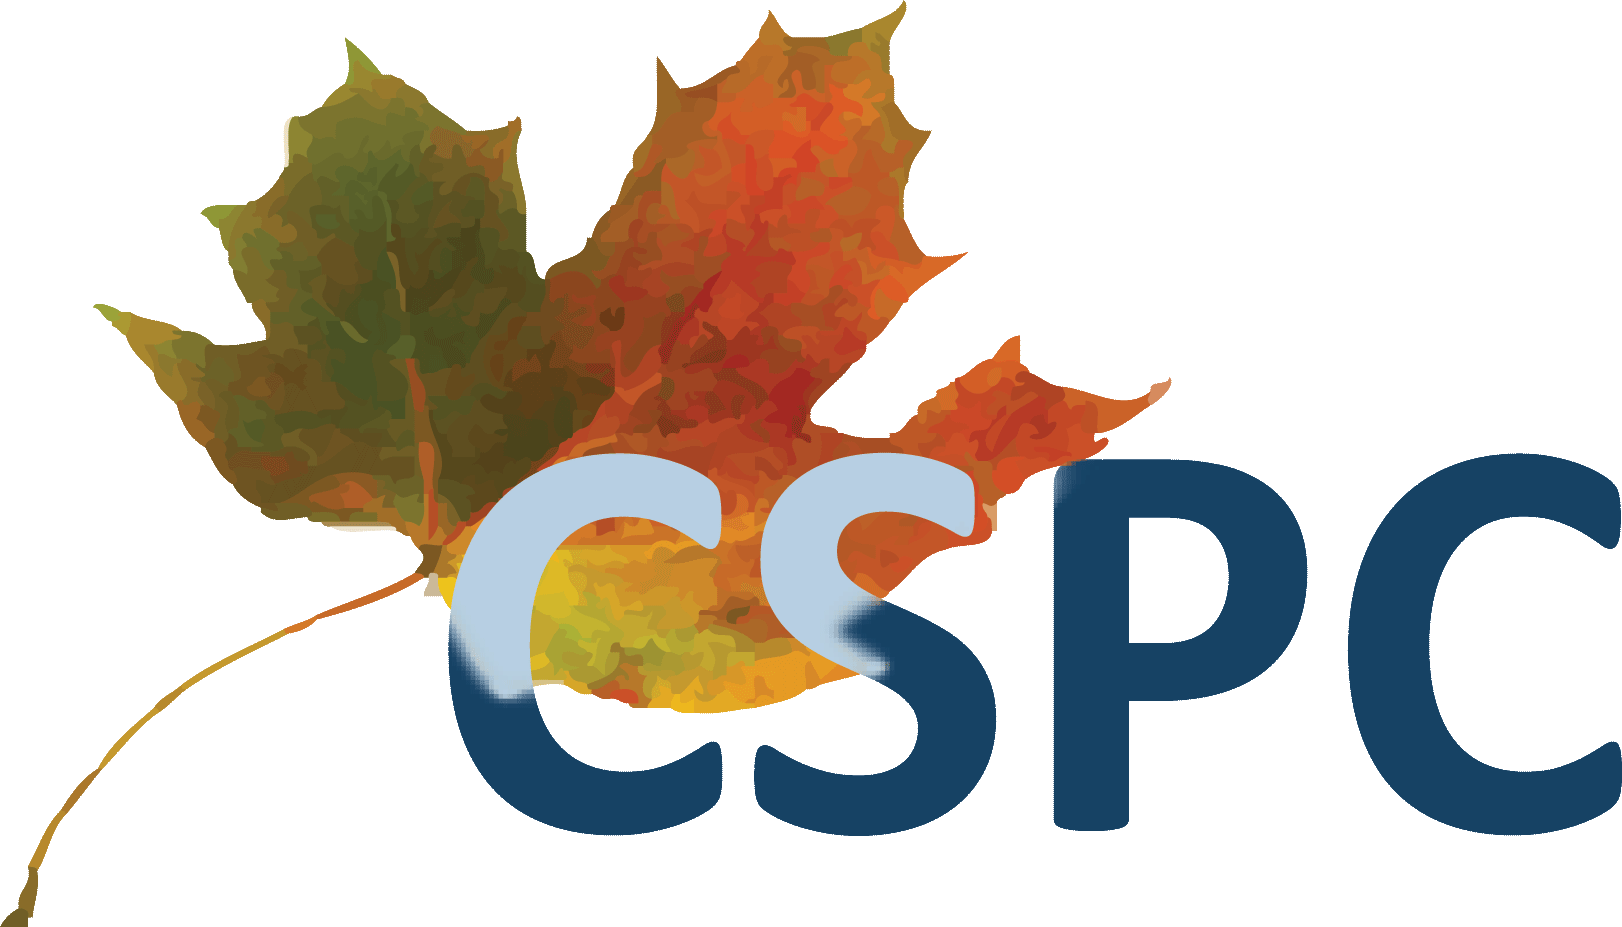 Canadian Science Policy Conference (CSPC 2016)